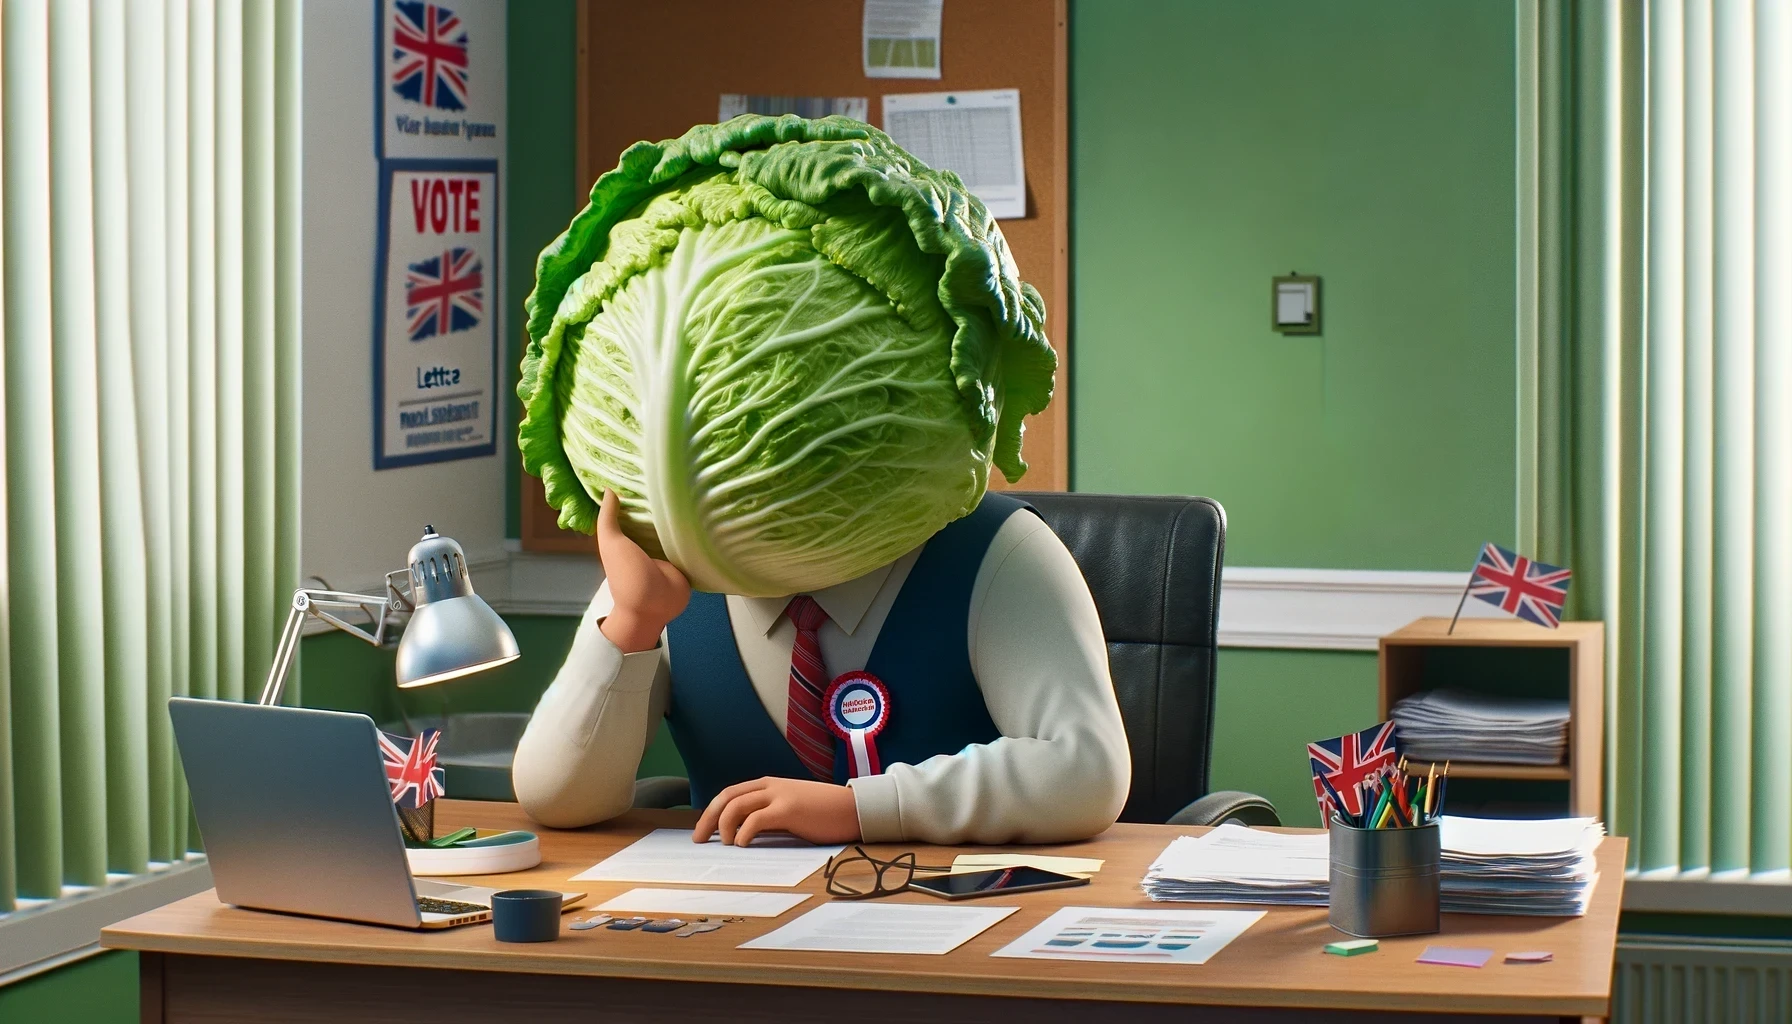 head-of-lettuce-to-return-to-uk-politics-independant-csdn-crustian-daily-27-05-2024